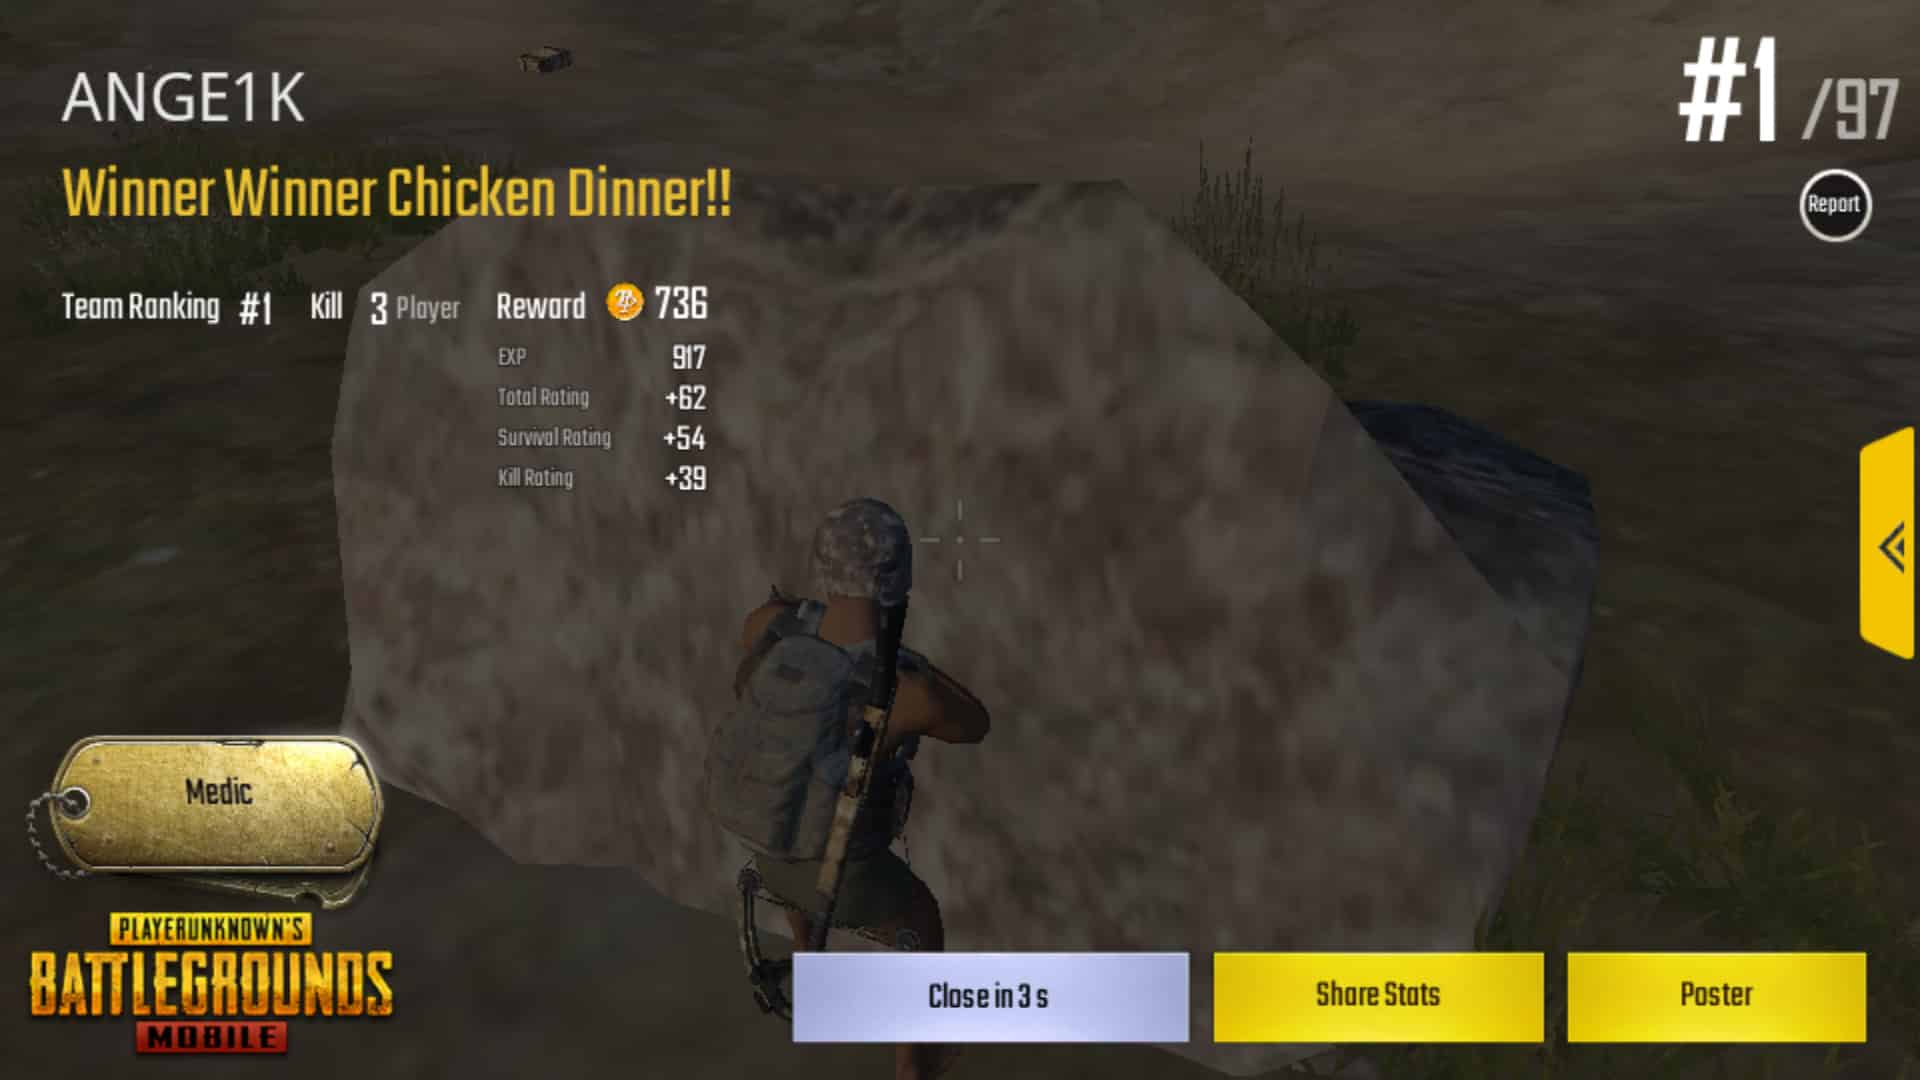 PUBG Mobile Runs So Smooth That I Got The Chicken Dinner In The